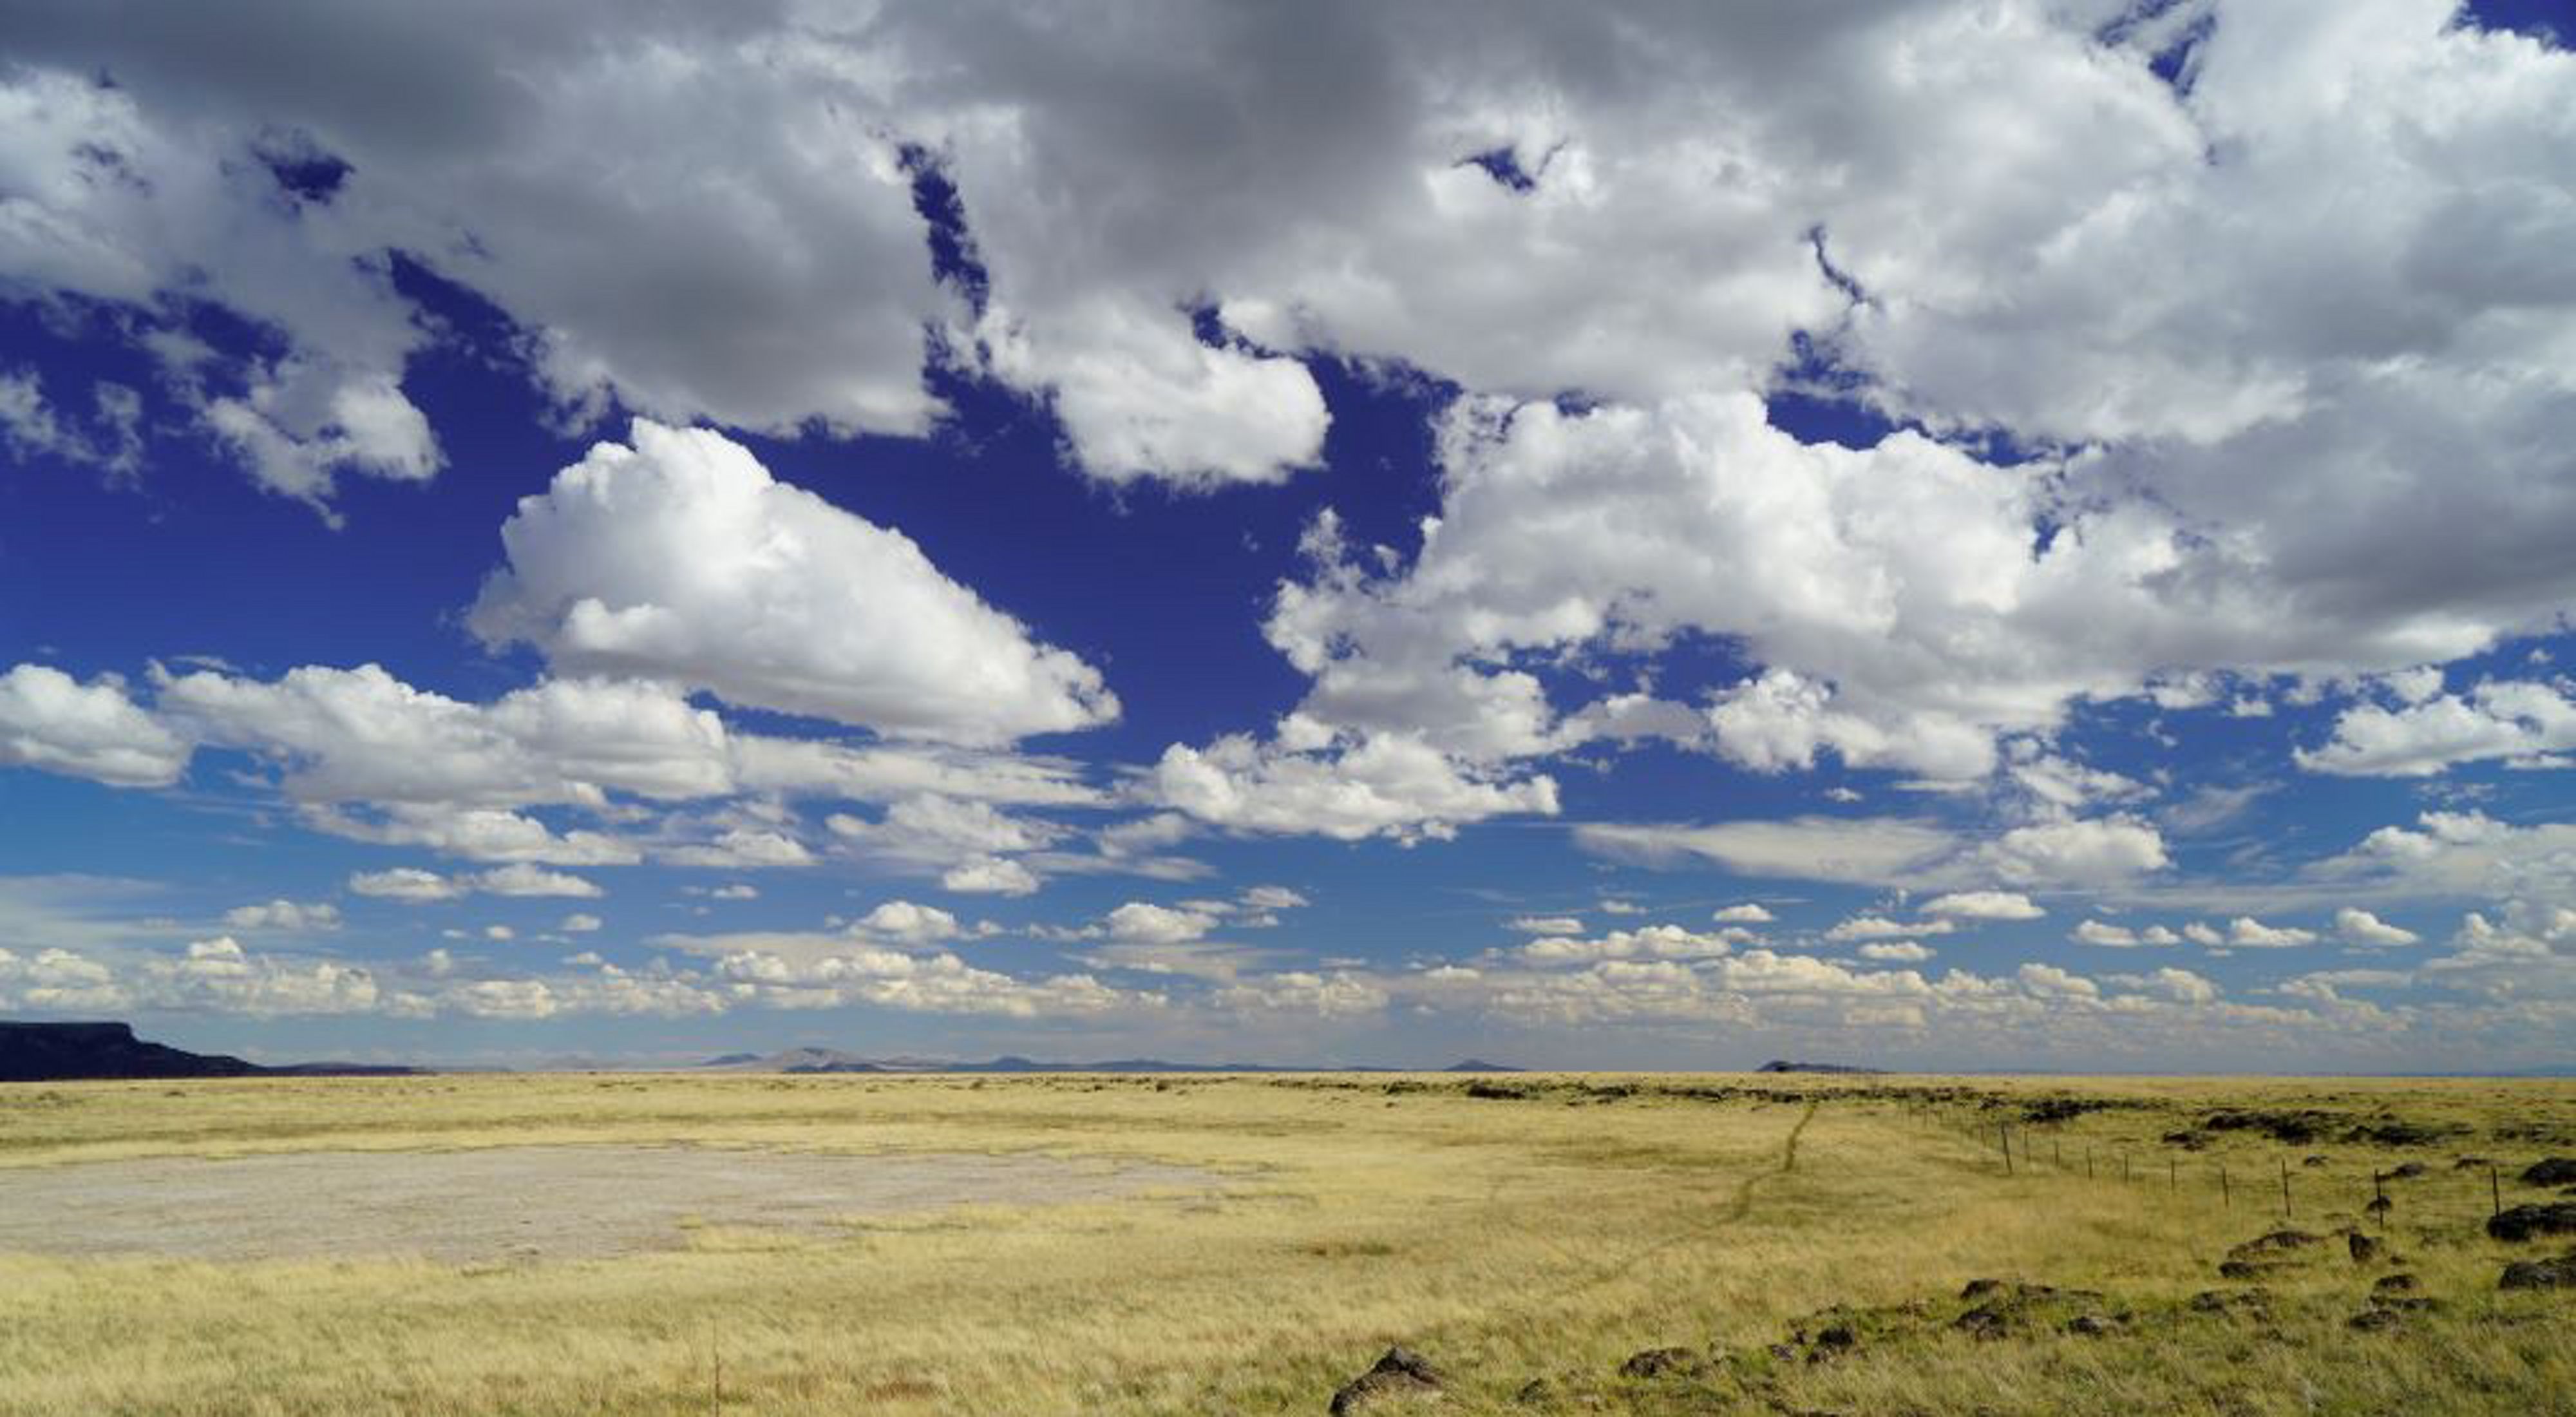 Grassland as far as the eye can see with a blue ombre sky and big fluffy white clouds.